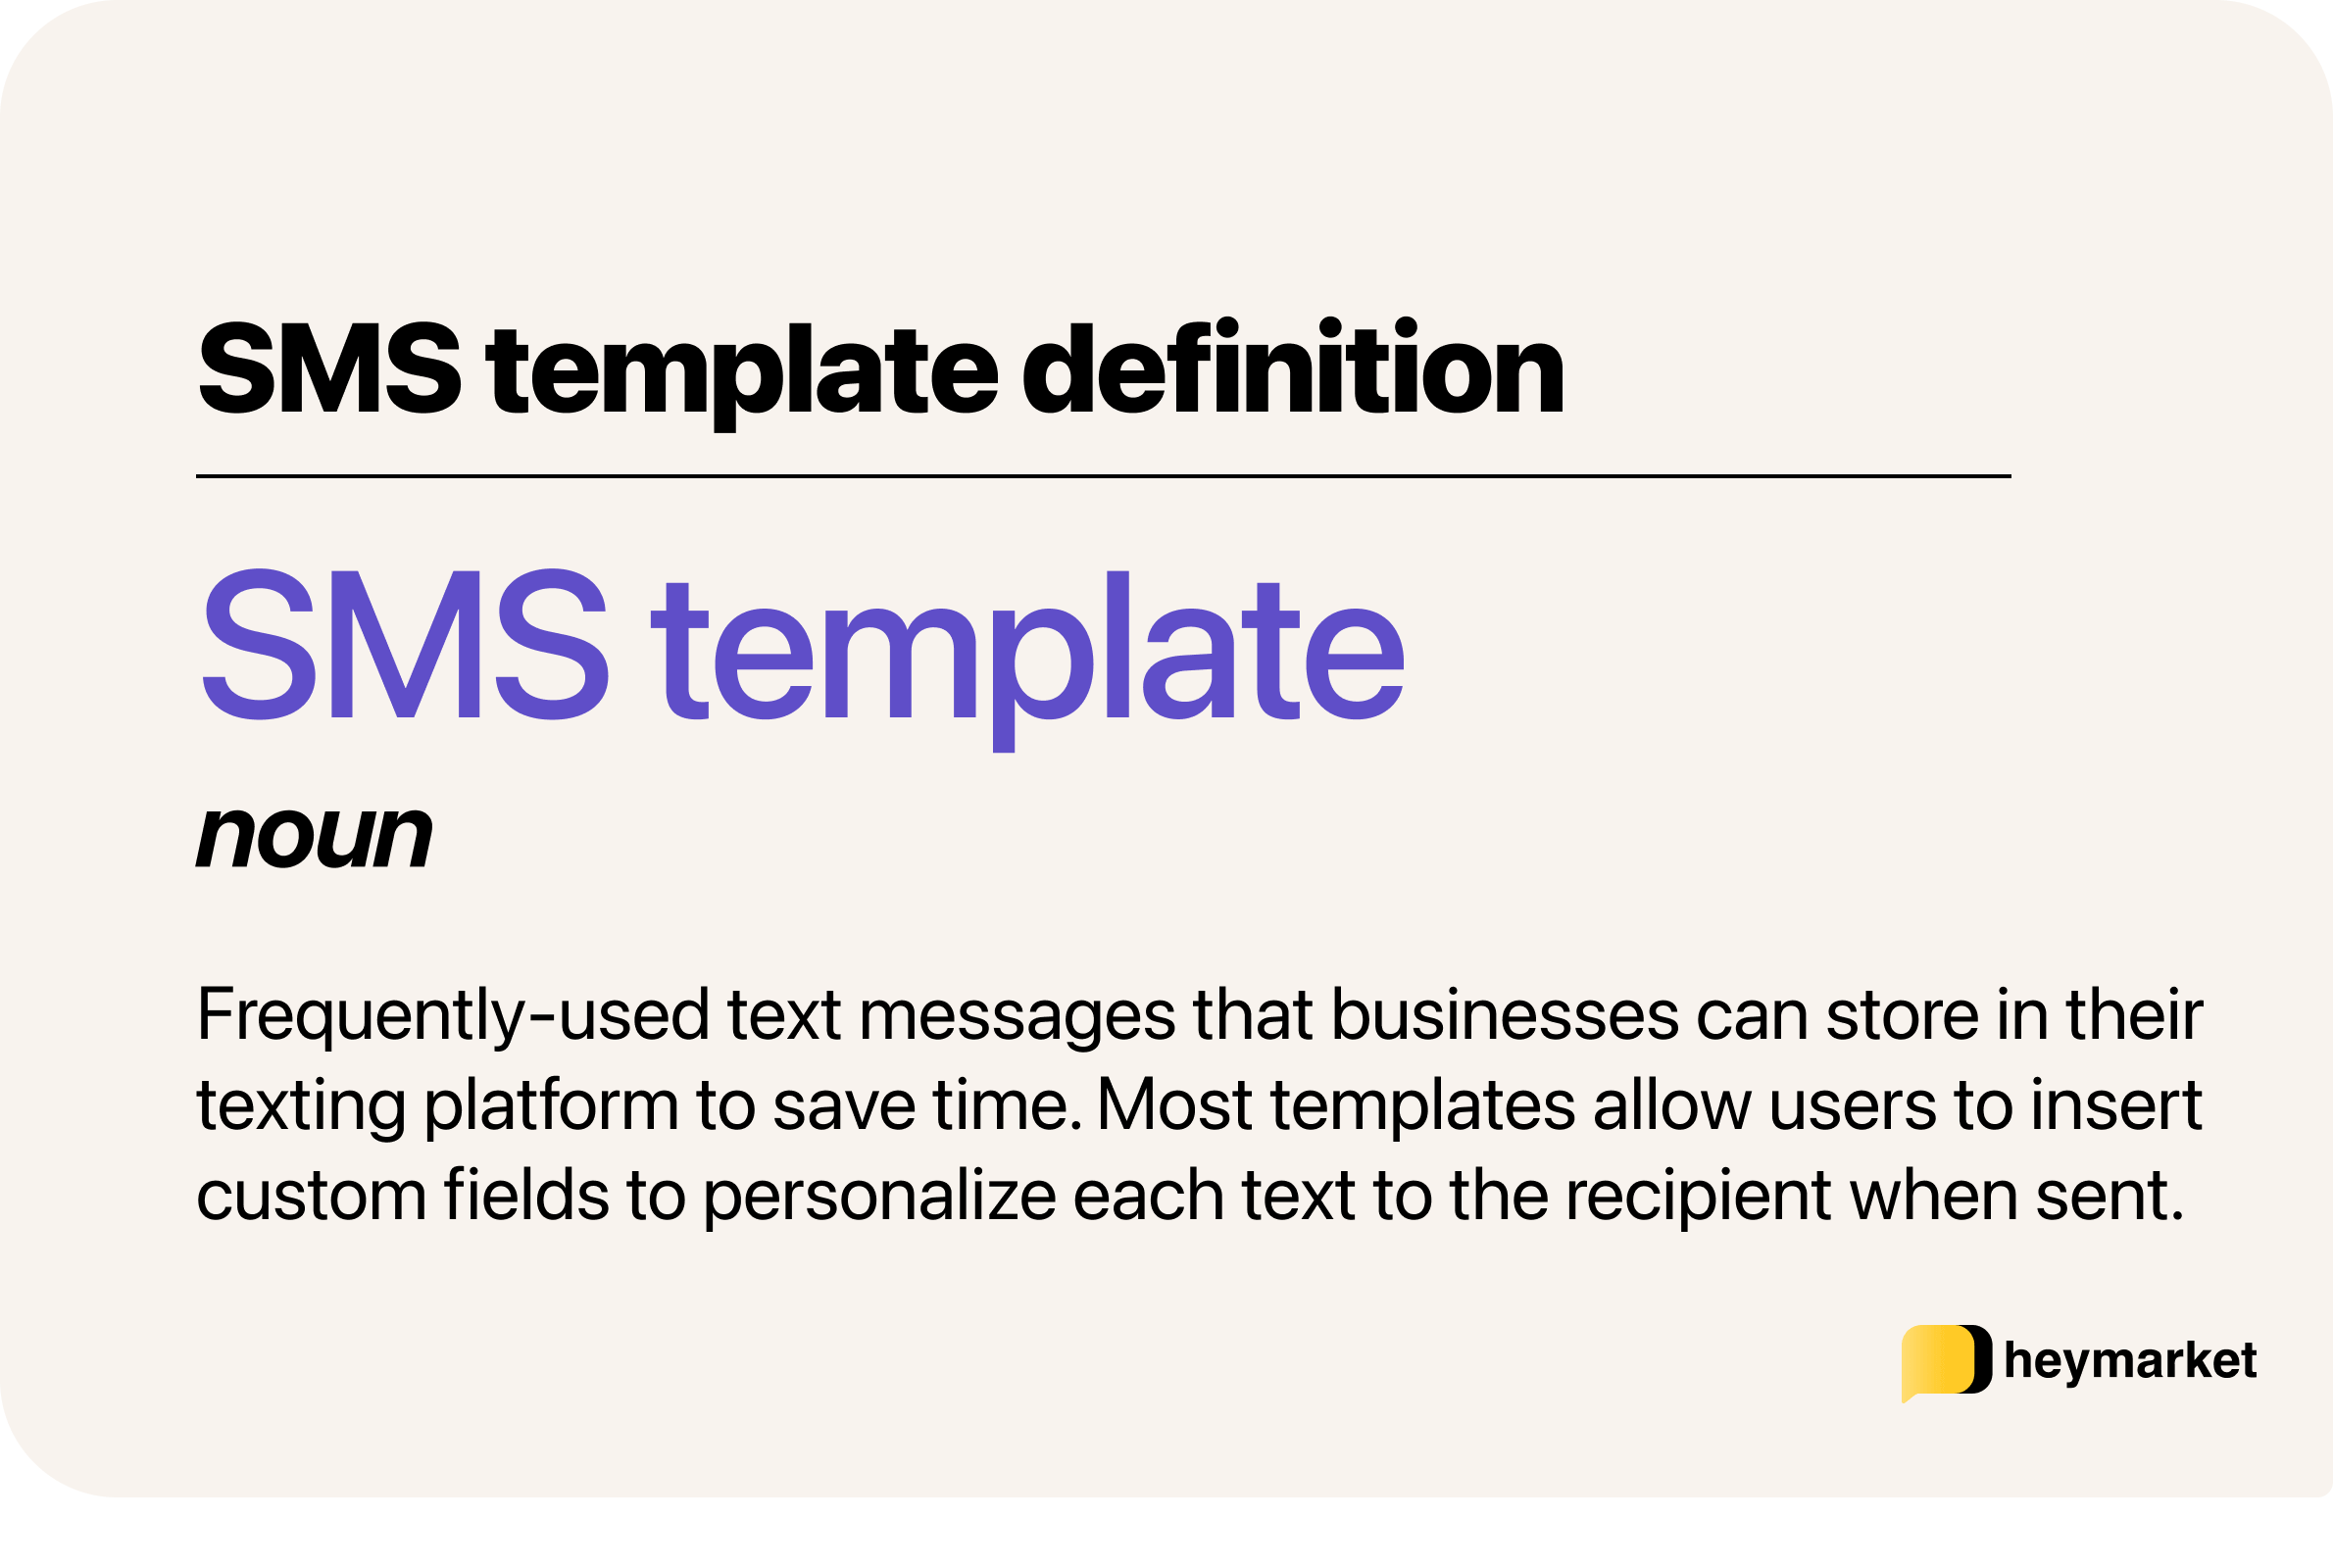 Definition of SMS template: Frequently-used text messages that businesses can store in their texting platform to save time. Most templates allow users to insert custom fields to personalize each text to the recipient when sent.